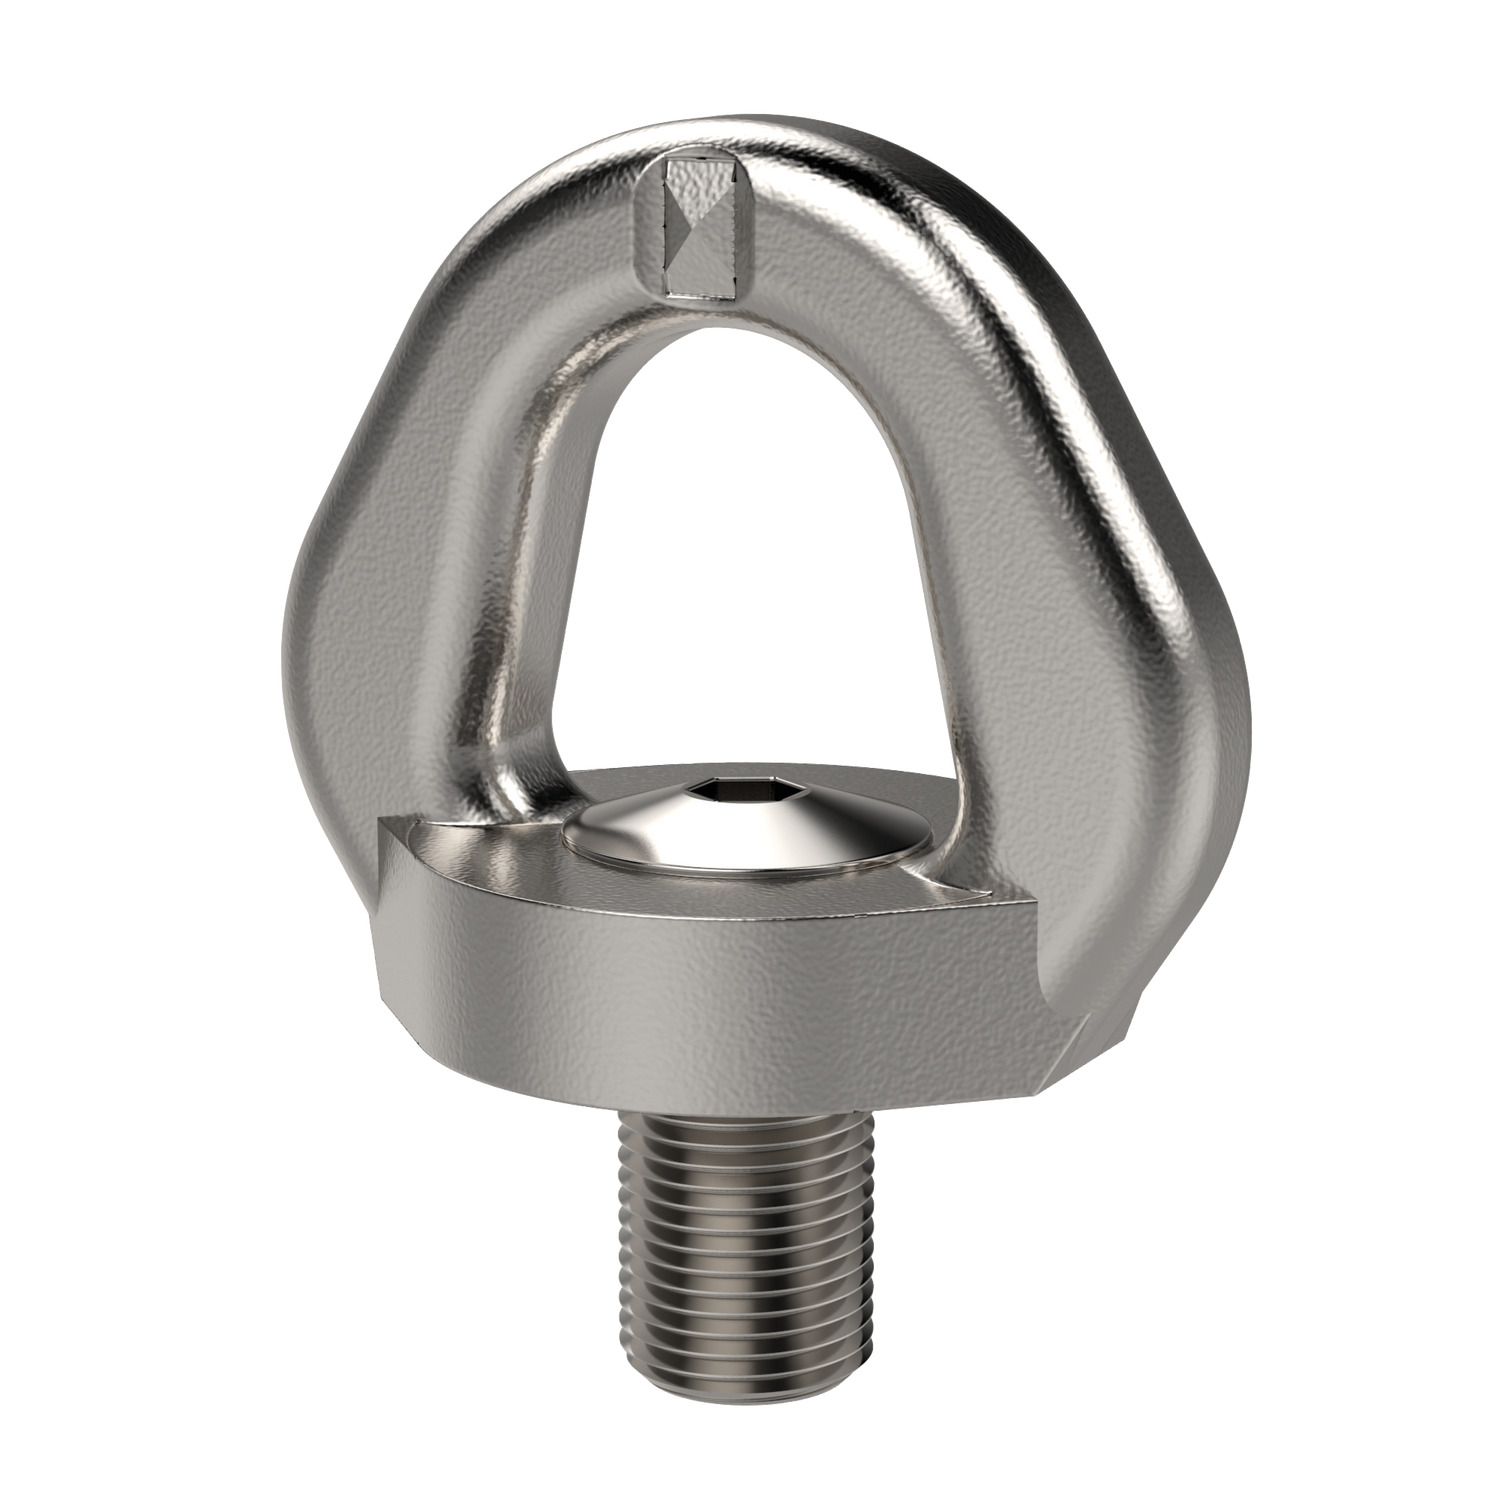 Product 63022, Swivel Eye Bolts Male male: stainless steel 316L / 